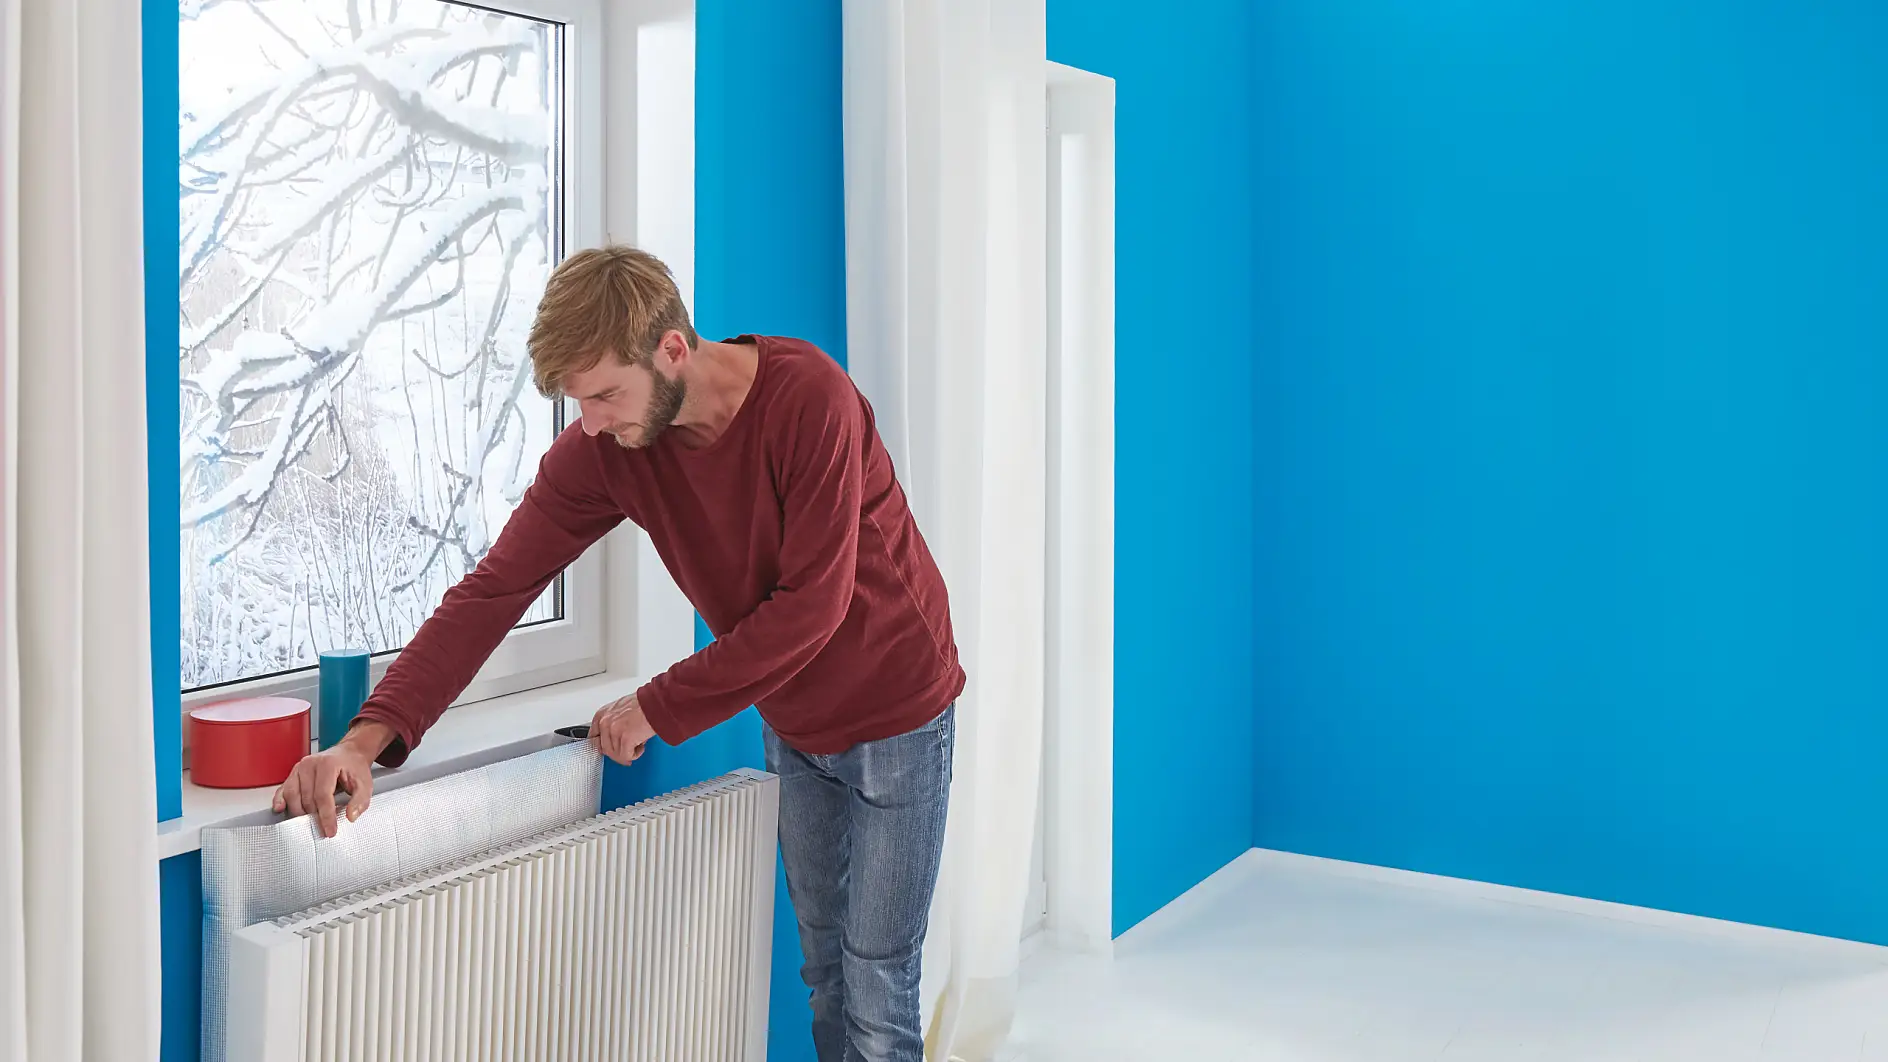 Saving energy and costs by insulating radiators